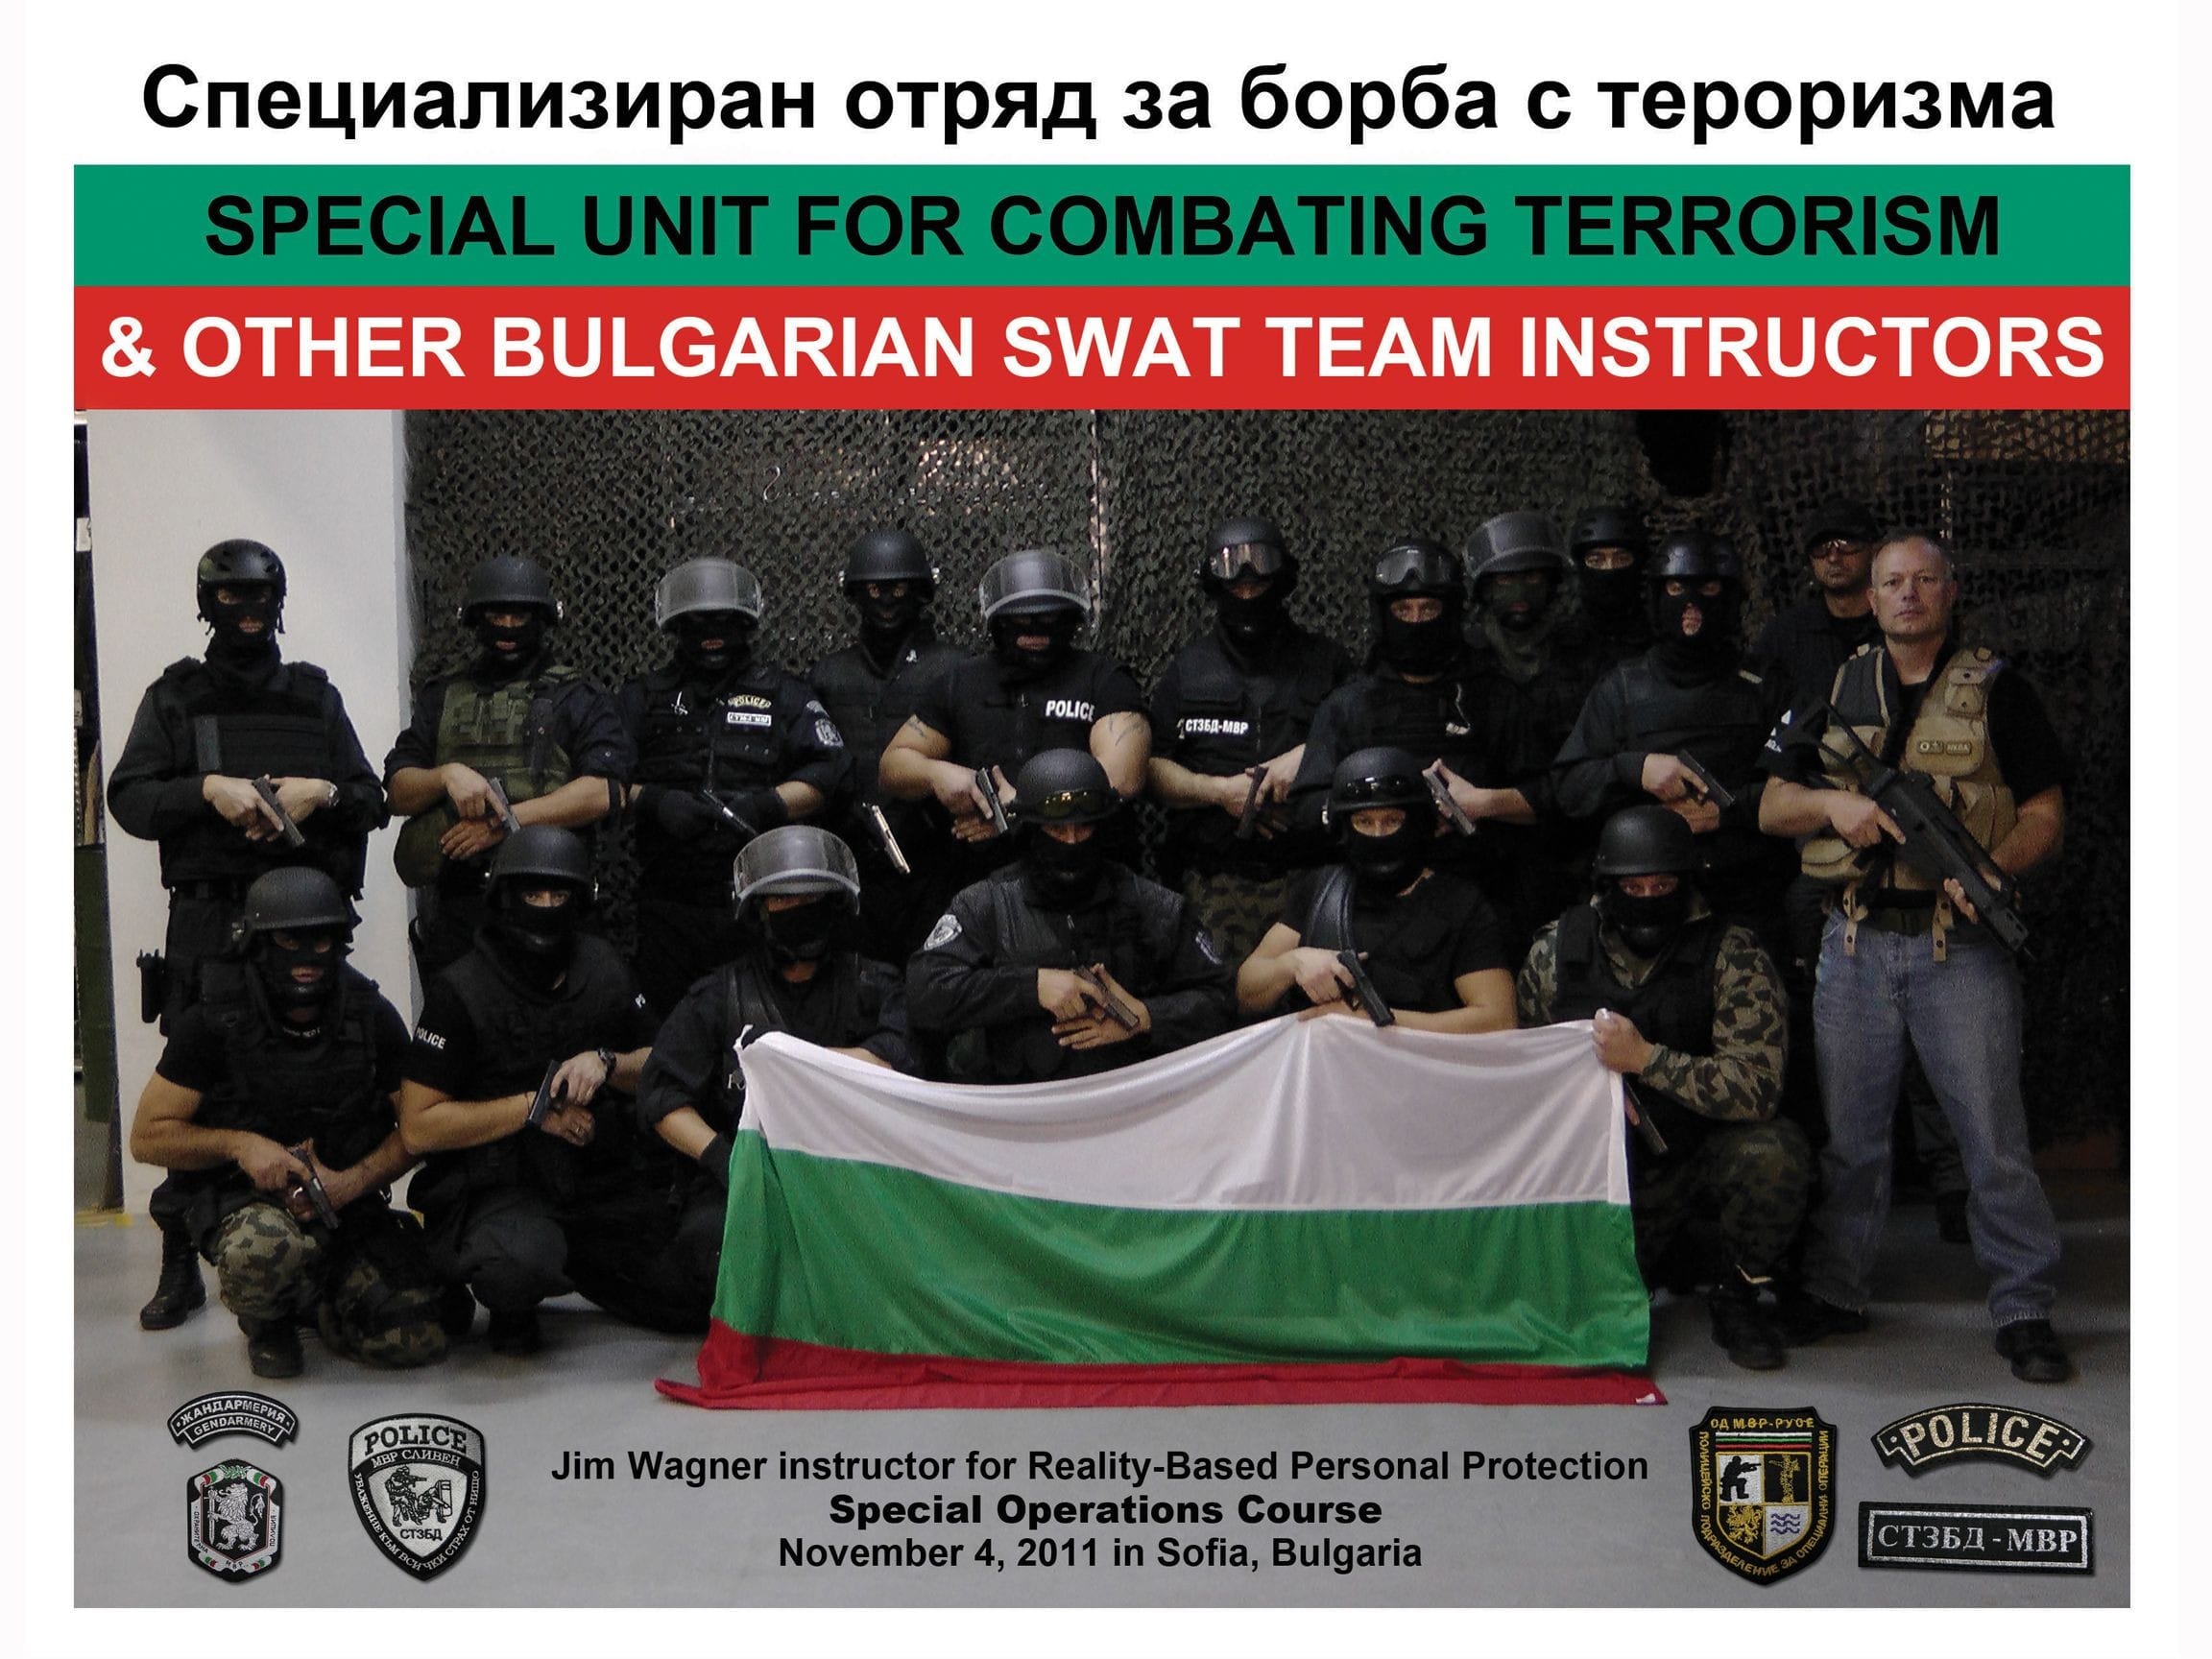 Jim (right) trained Bulgaria's national counterterrorist team, along with other SWAT teams in Sofia, Bulgaria.